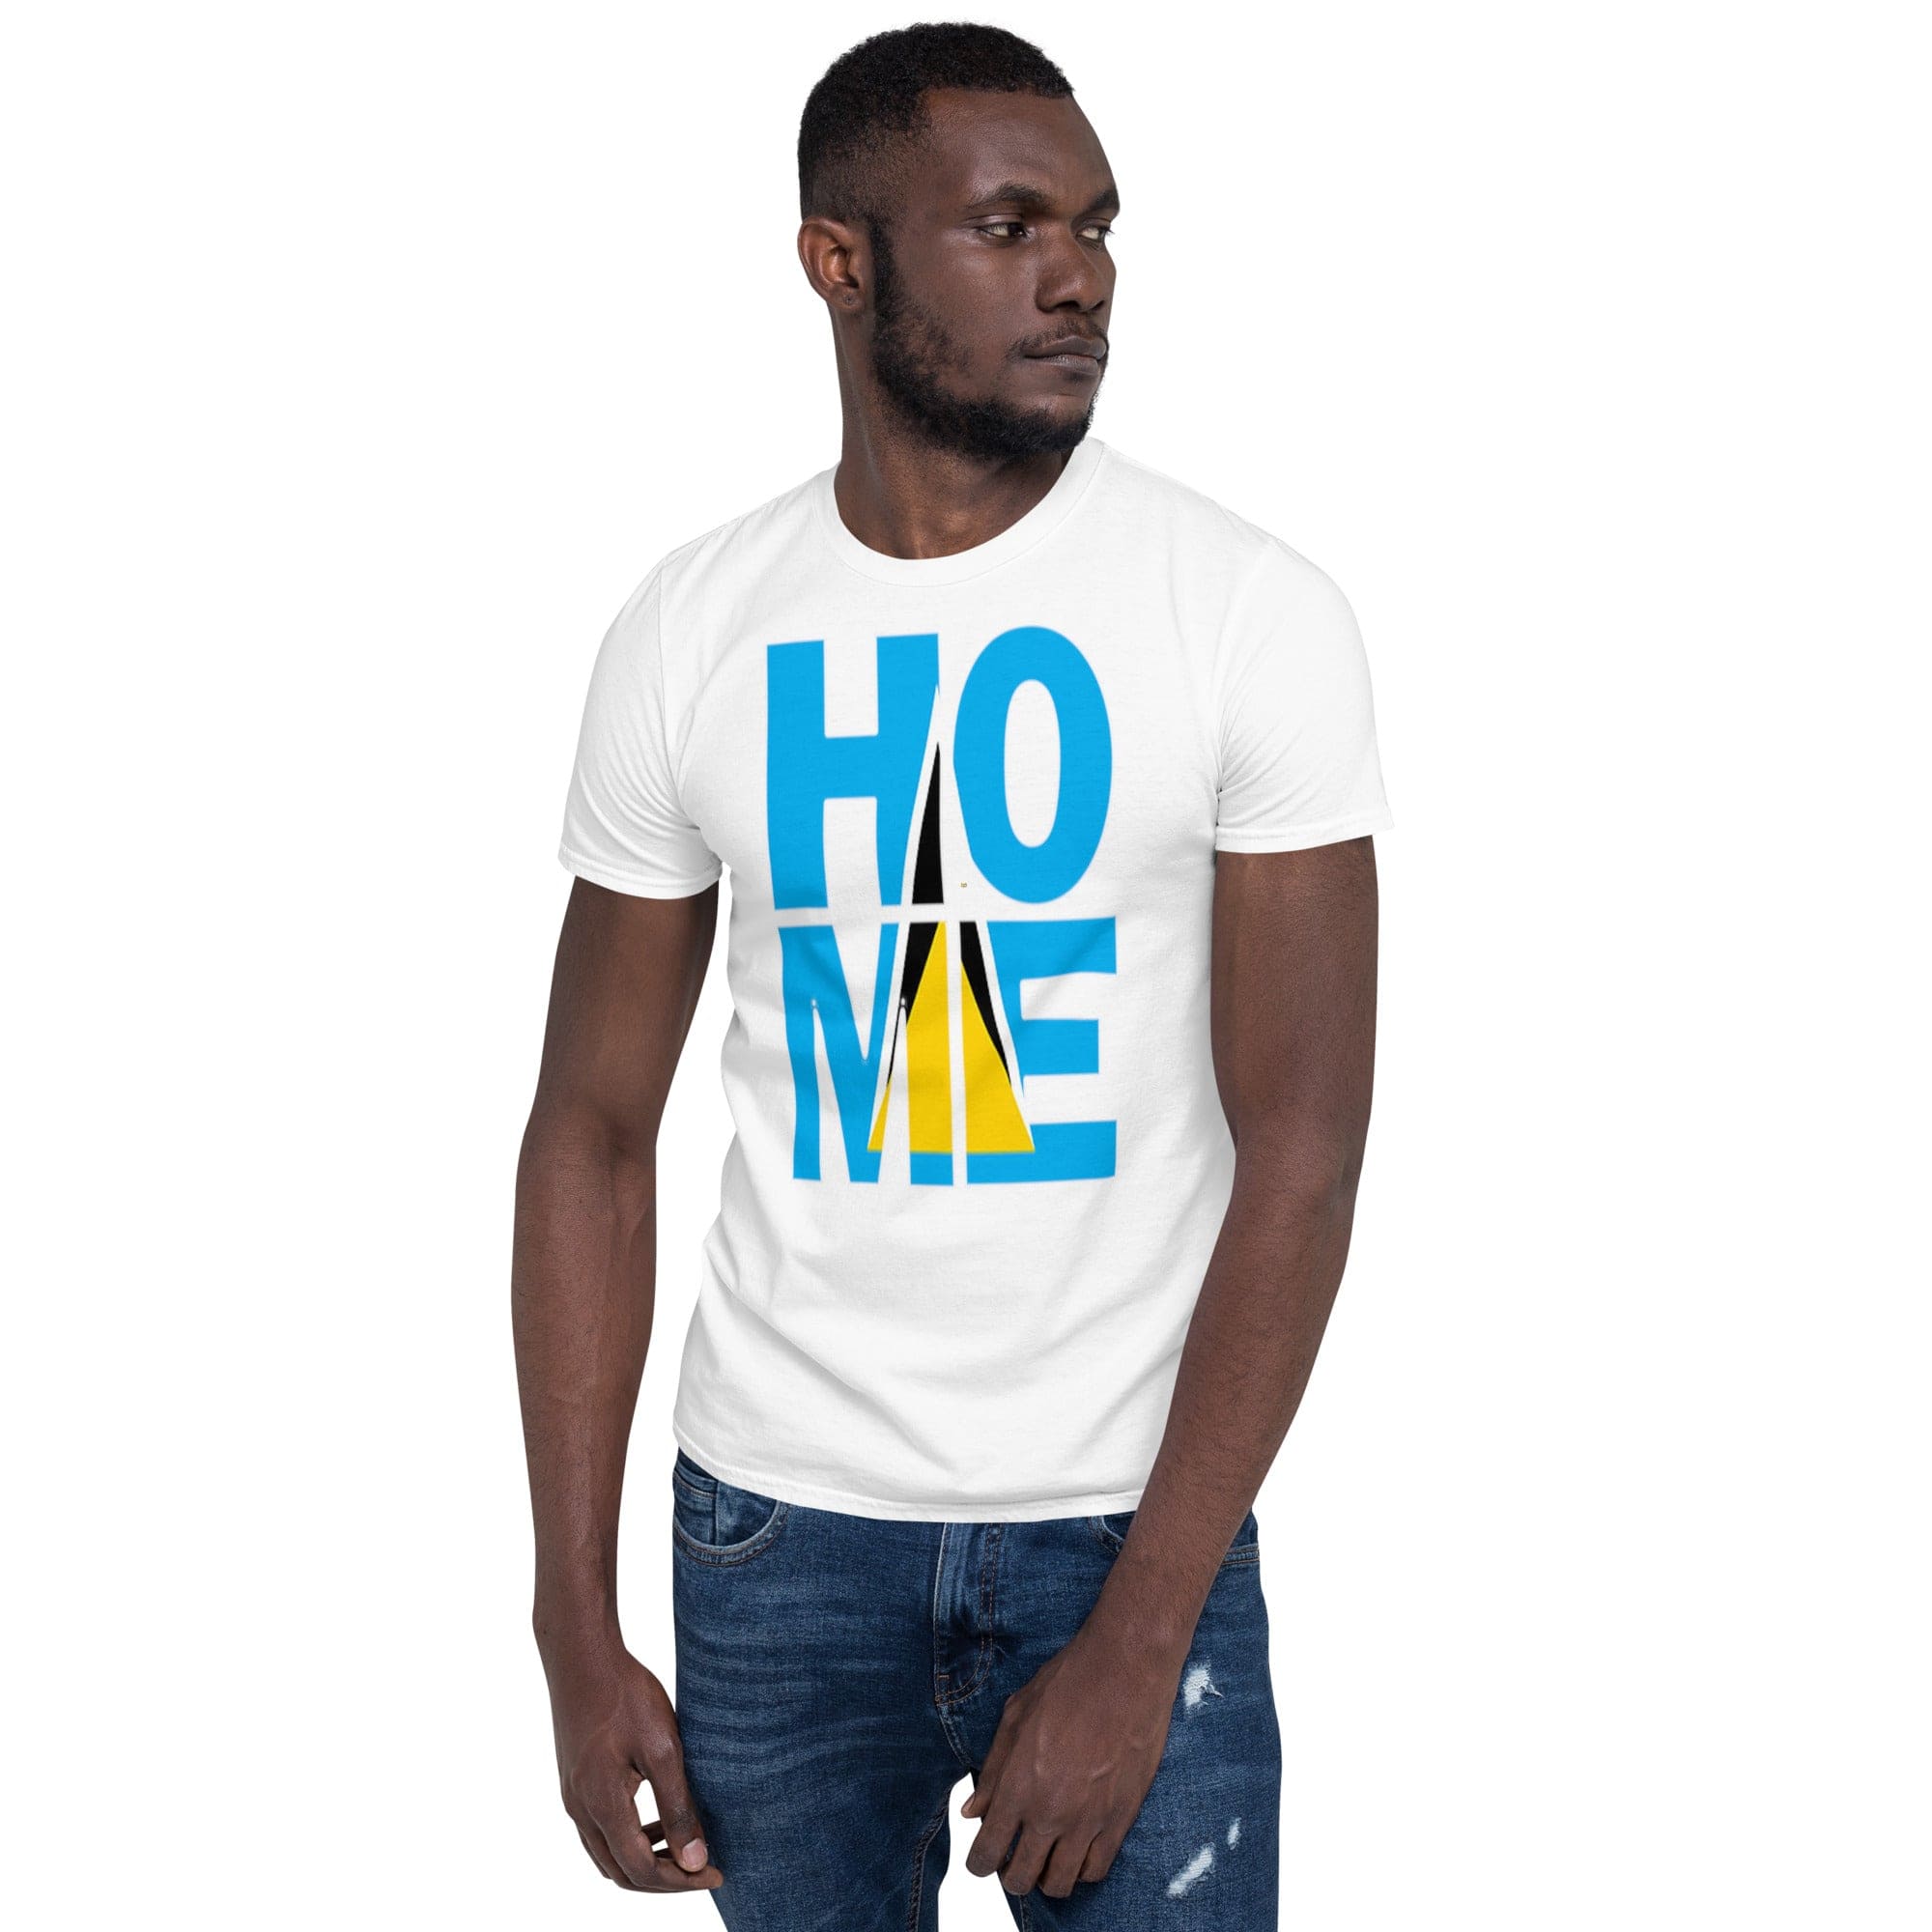 St. Lucia Flag design in the words HOME on a white color shirt on the front of a black man.